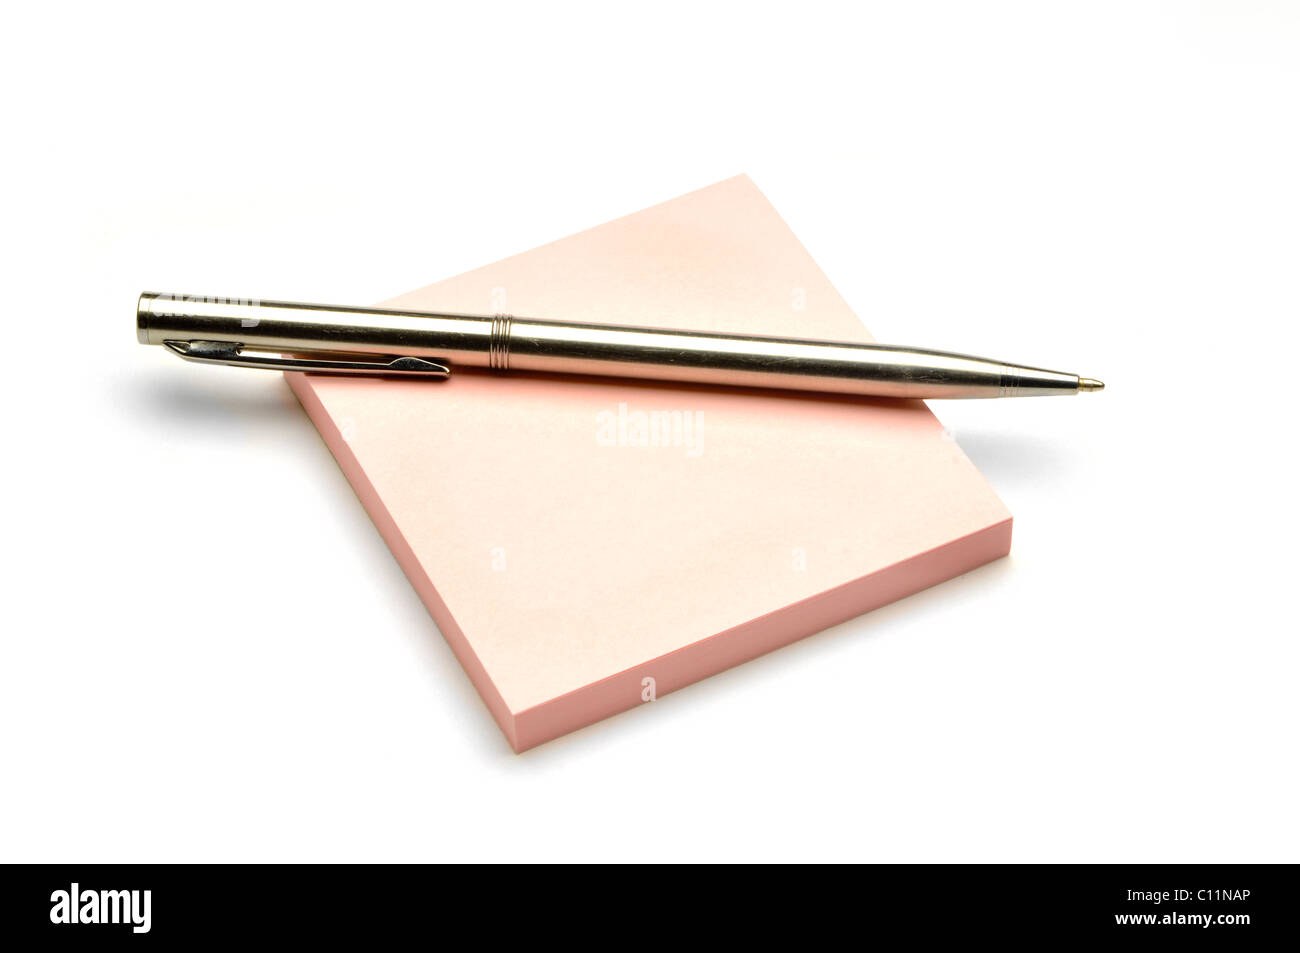 silver writing pen on colored note pad Stock Photo